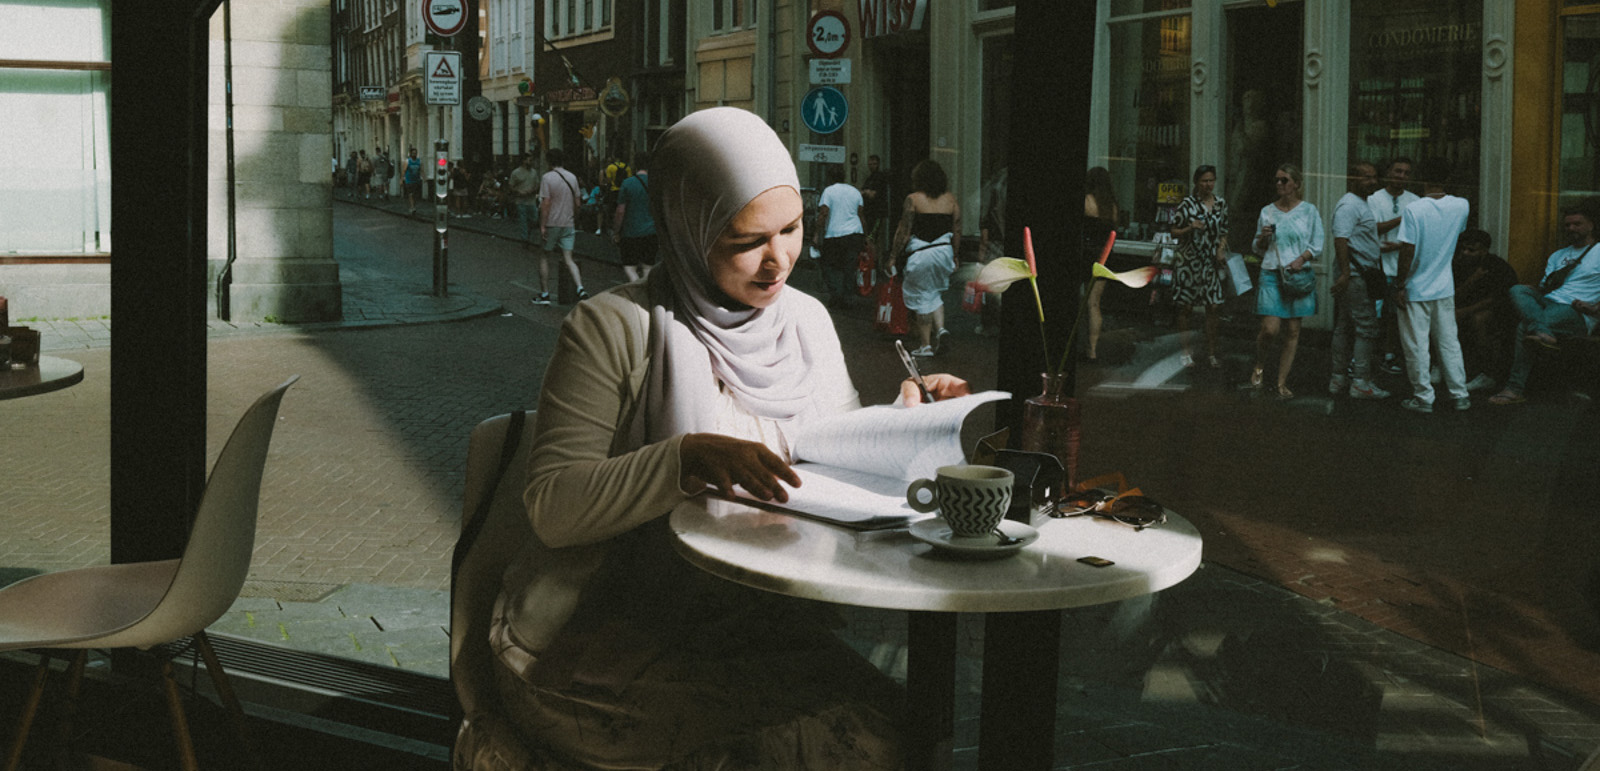 From a cafe in downtown Amsterdam, lawyer Elsa van de Loo sits discusses the implications of the new layer added to the Netherlands' headscarf ban for Dutch Muslims. 